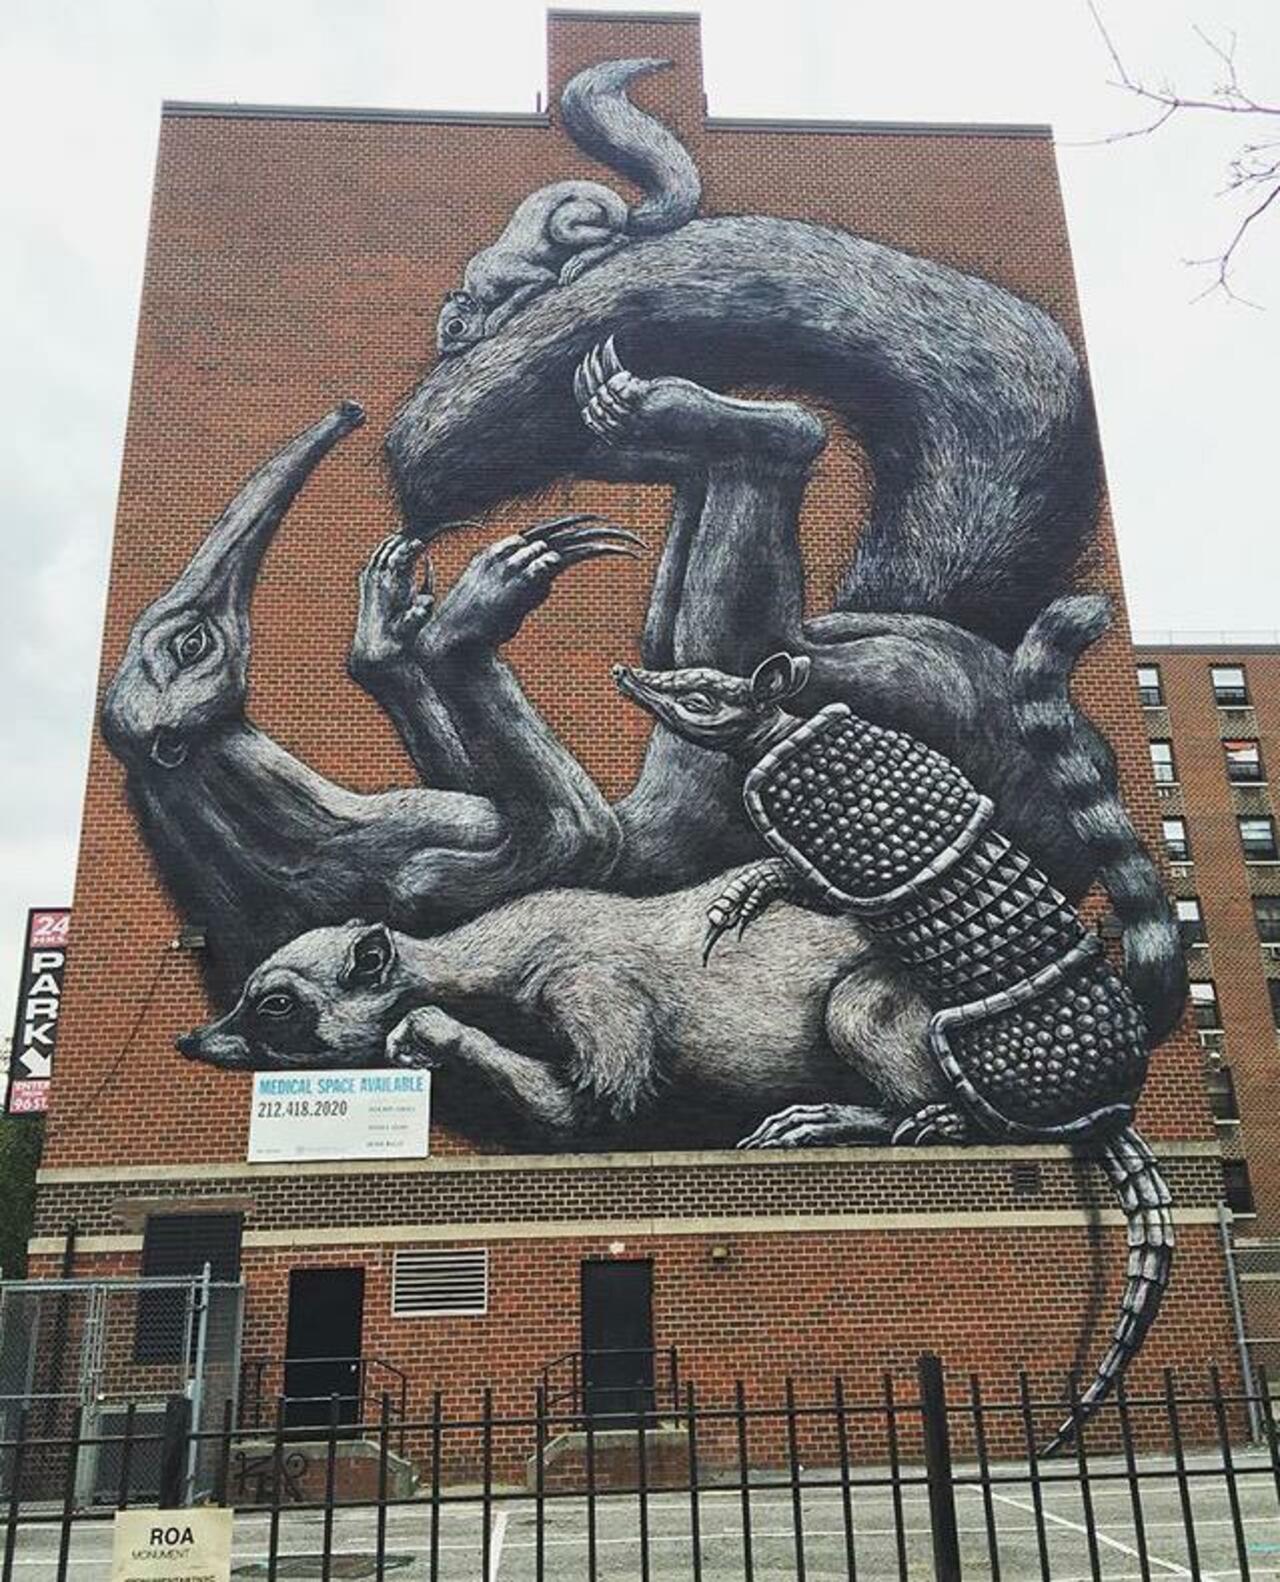 RT @GoogleStreetArt: The completed new large scale Street Art wall by ROA in NYC

#art #graffiti #mural #streetart http://t.co/XqfgA08afb